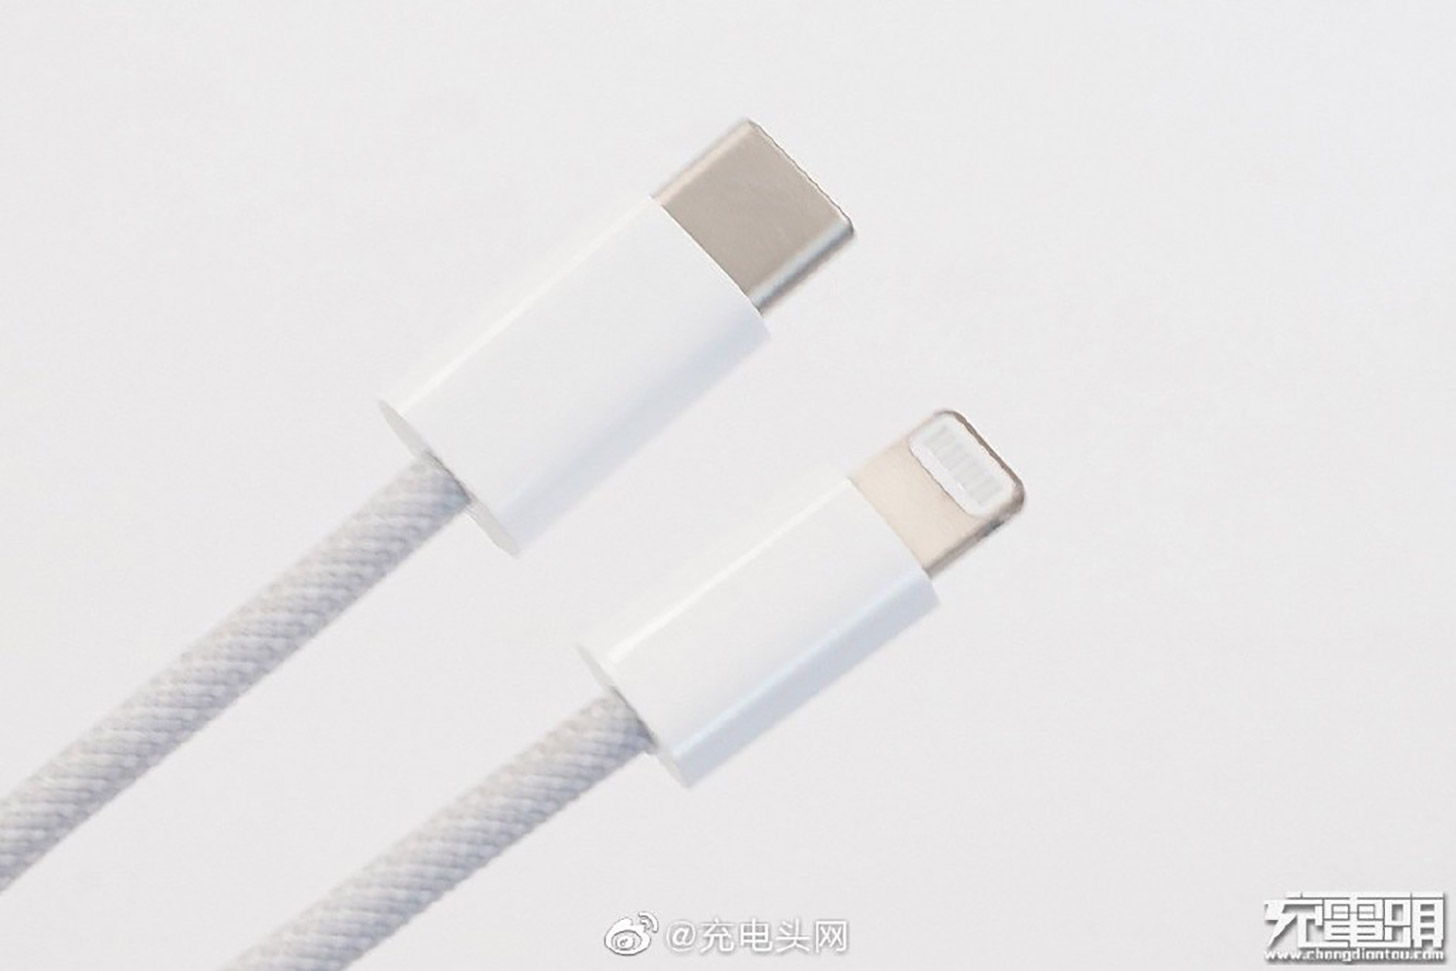 Photos Of Apple's Braided Charging Cable For iPhone 12 Leak